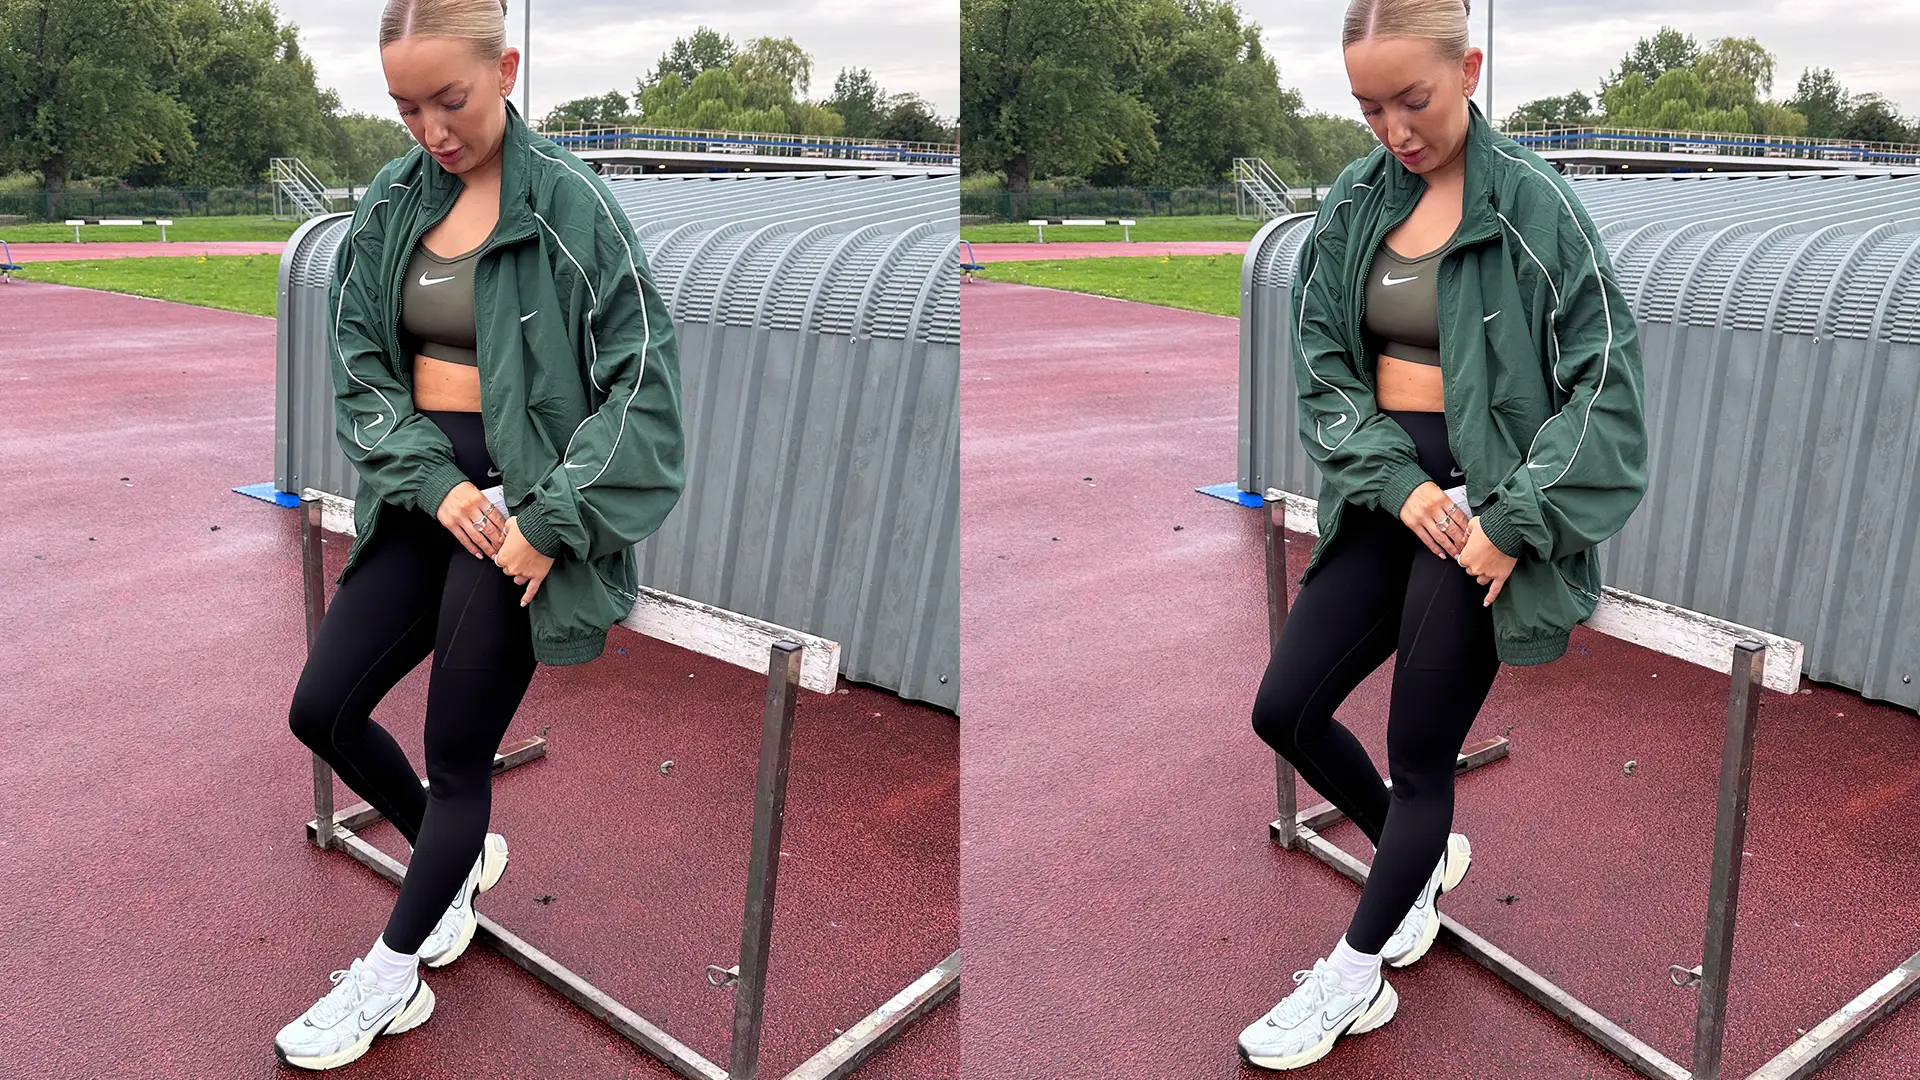 Nike Just Created the Perfect Leggings - And Yes, They Have